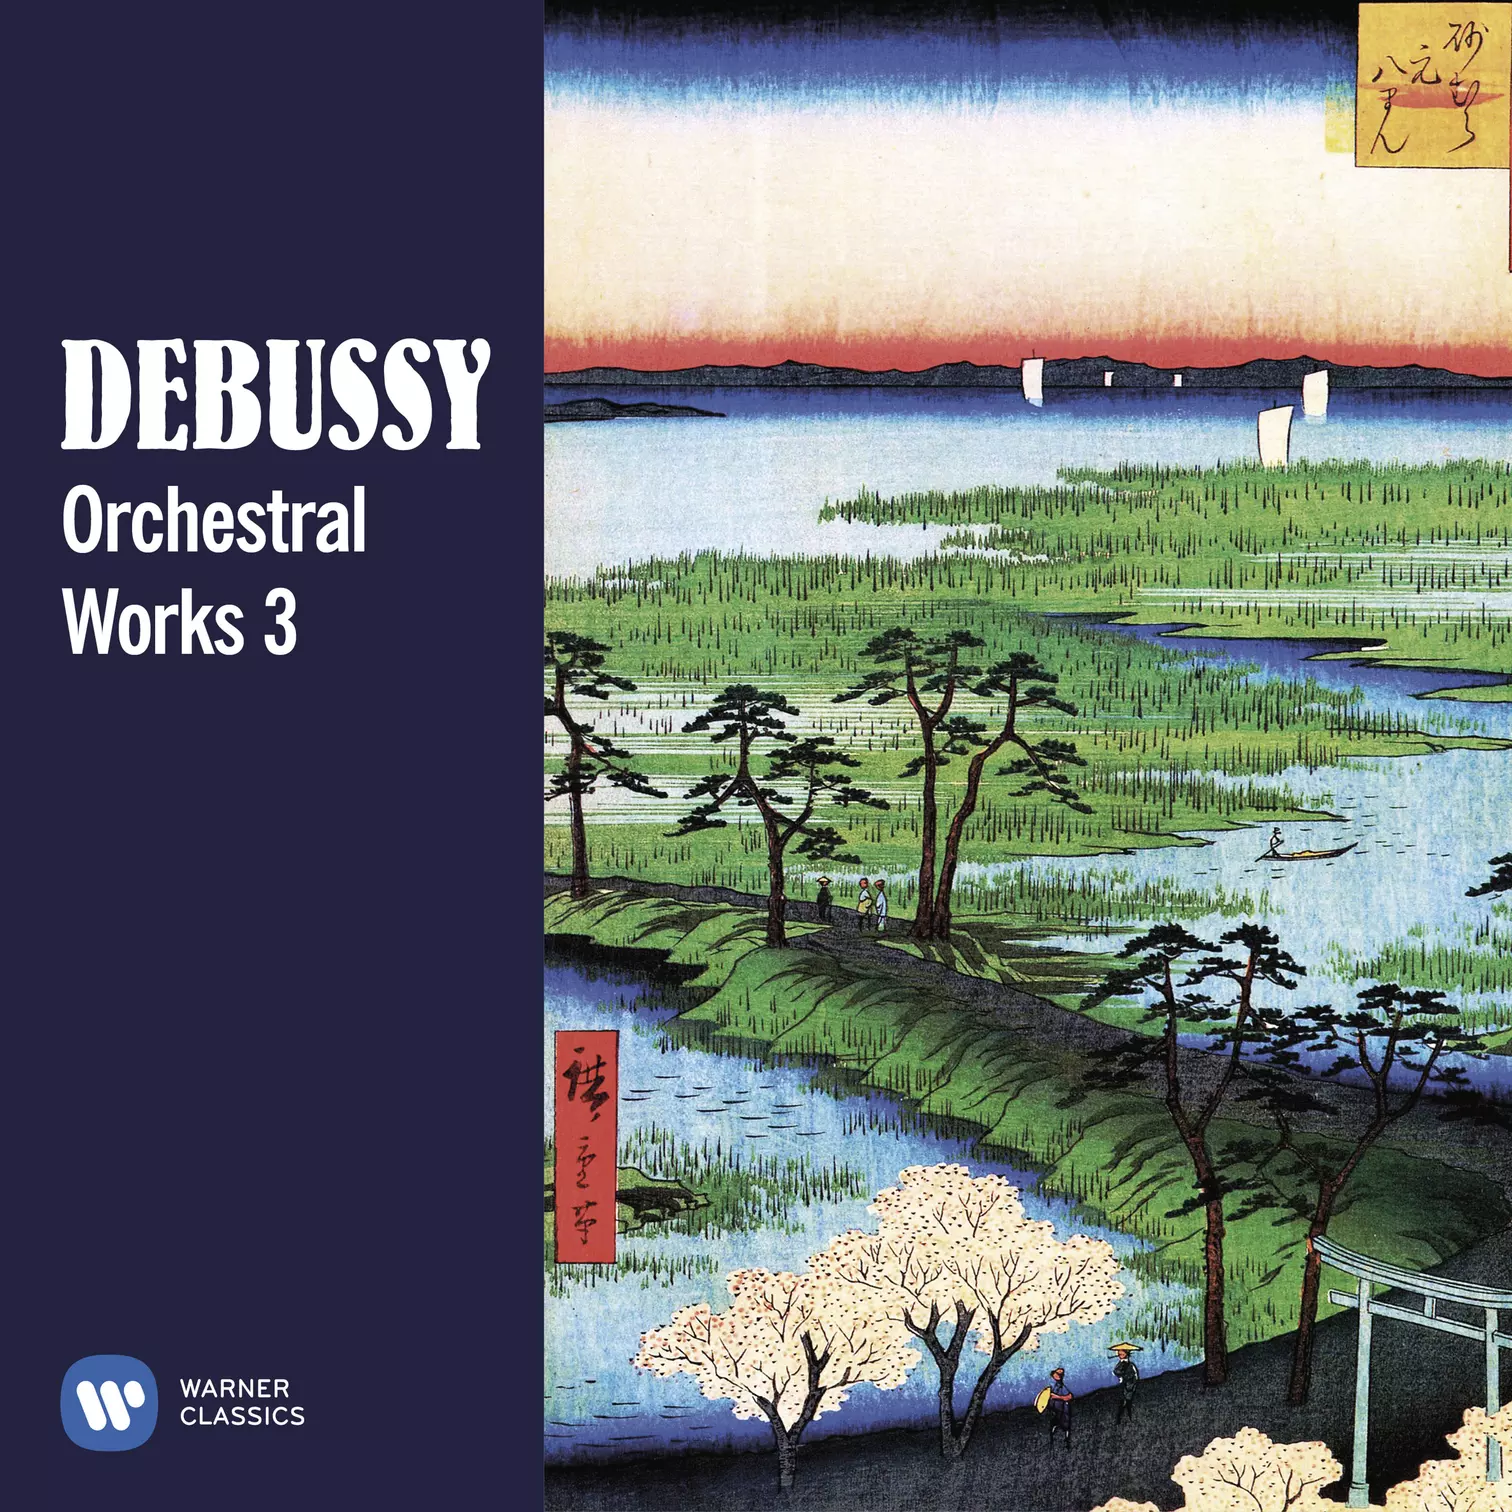 Debussy: Orchestral Works 3